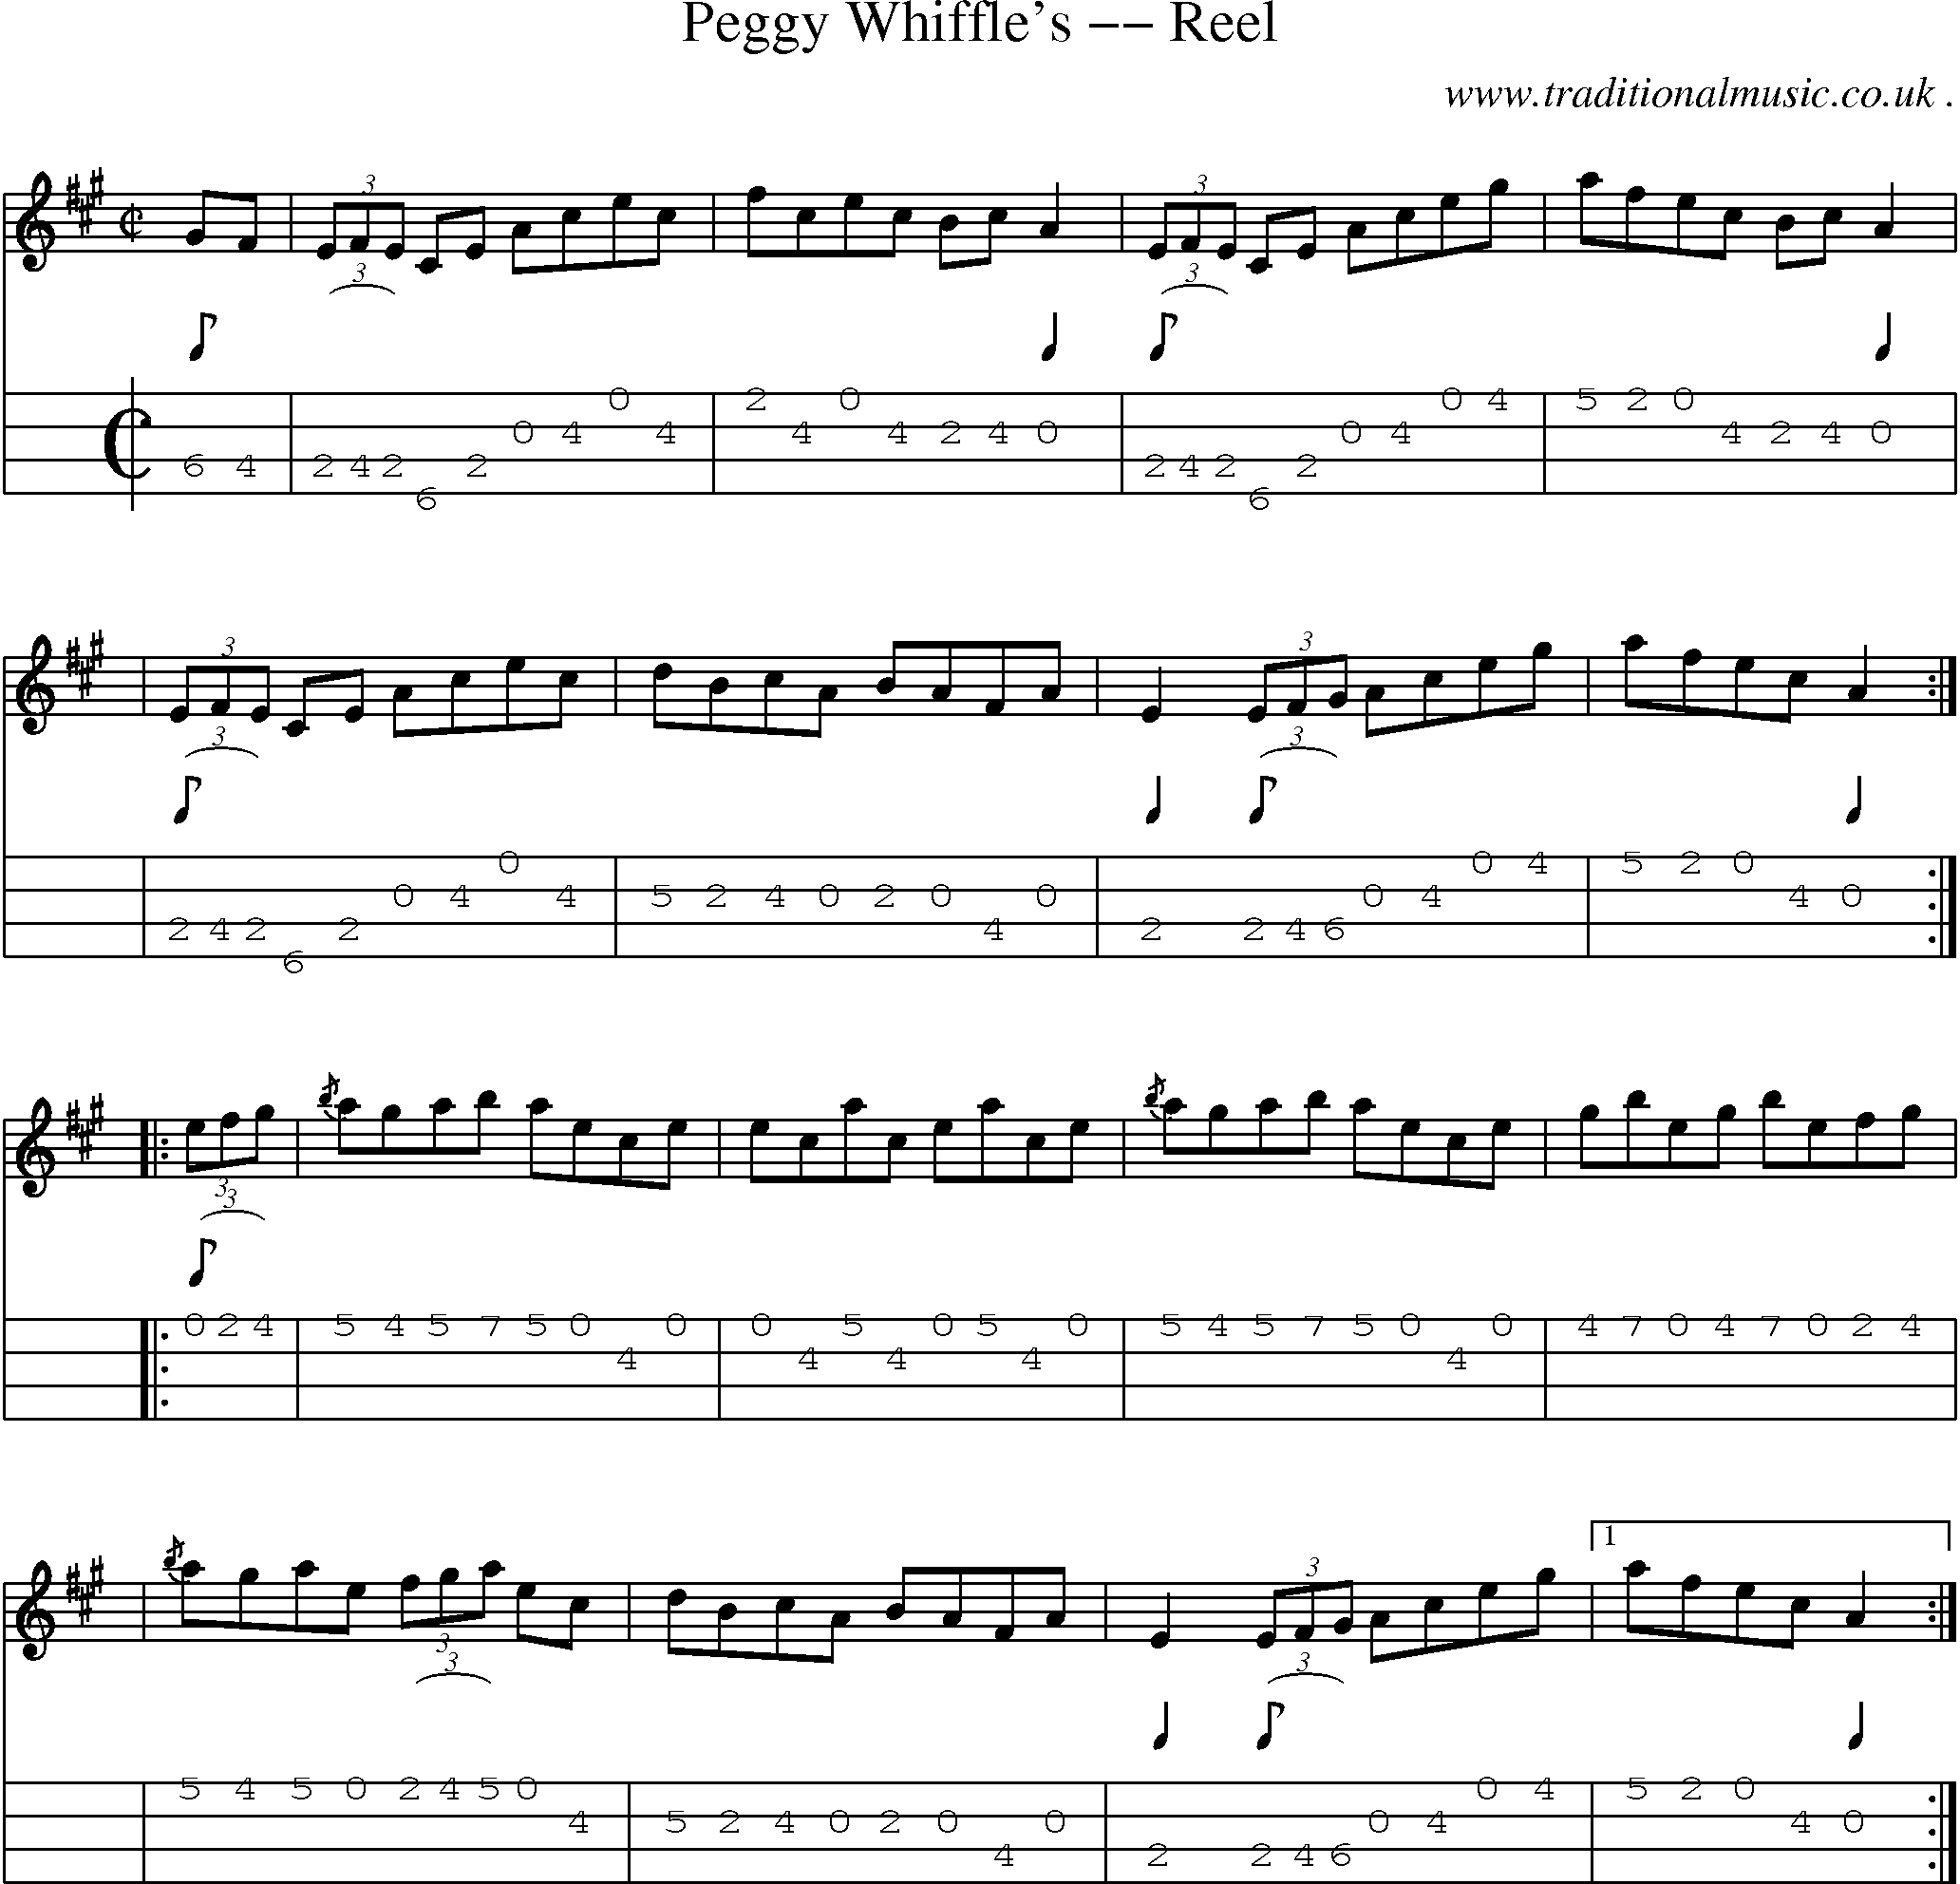 Sheet-music  score, Chords and Mandolin Tabs for Peggy Whiffles -- Reel